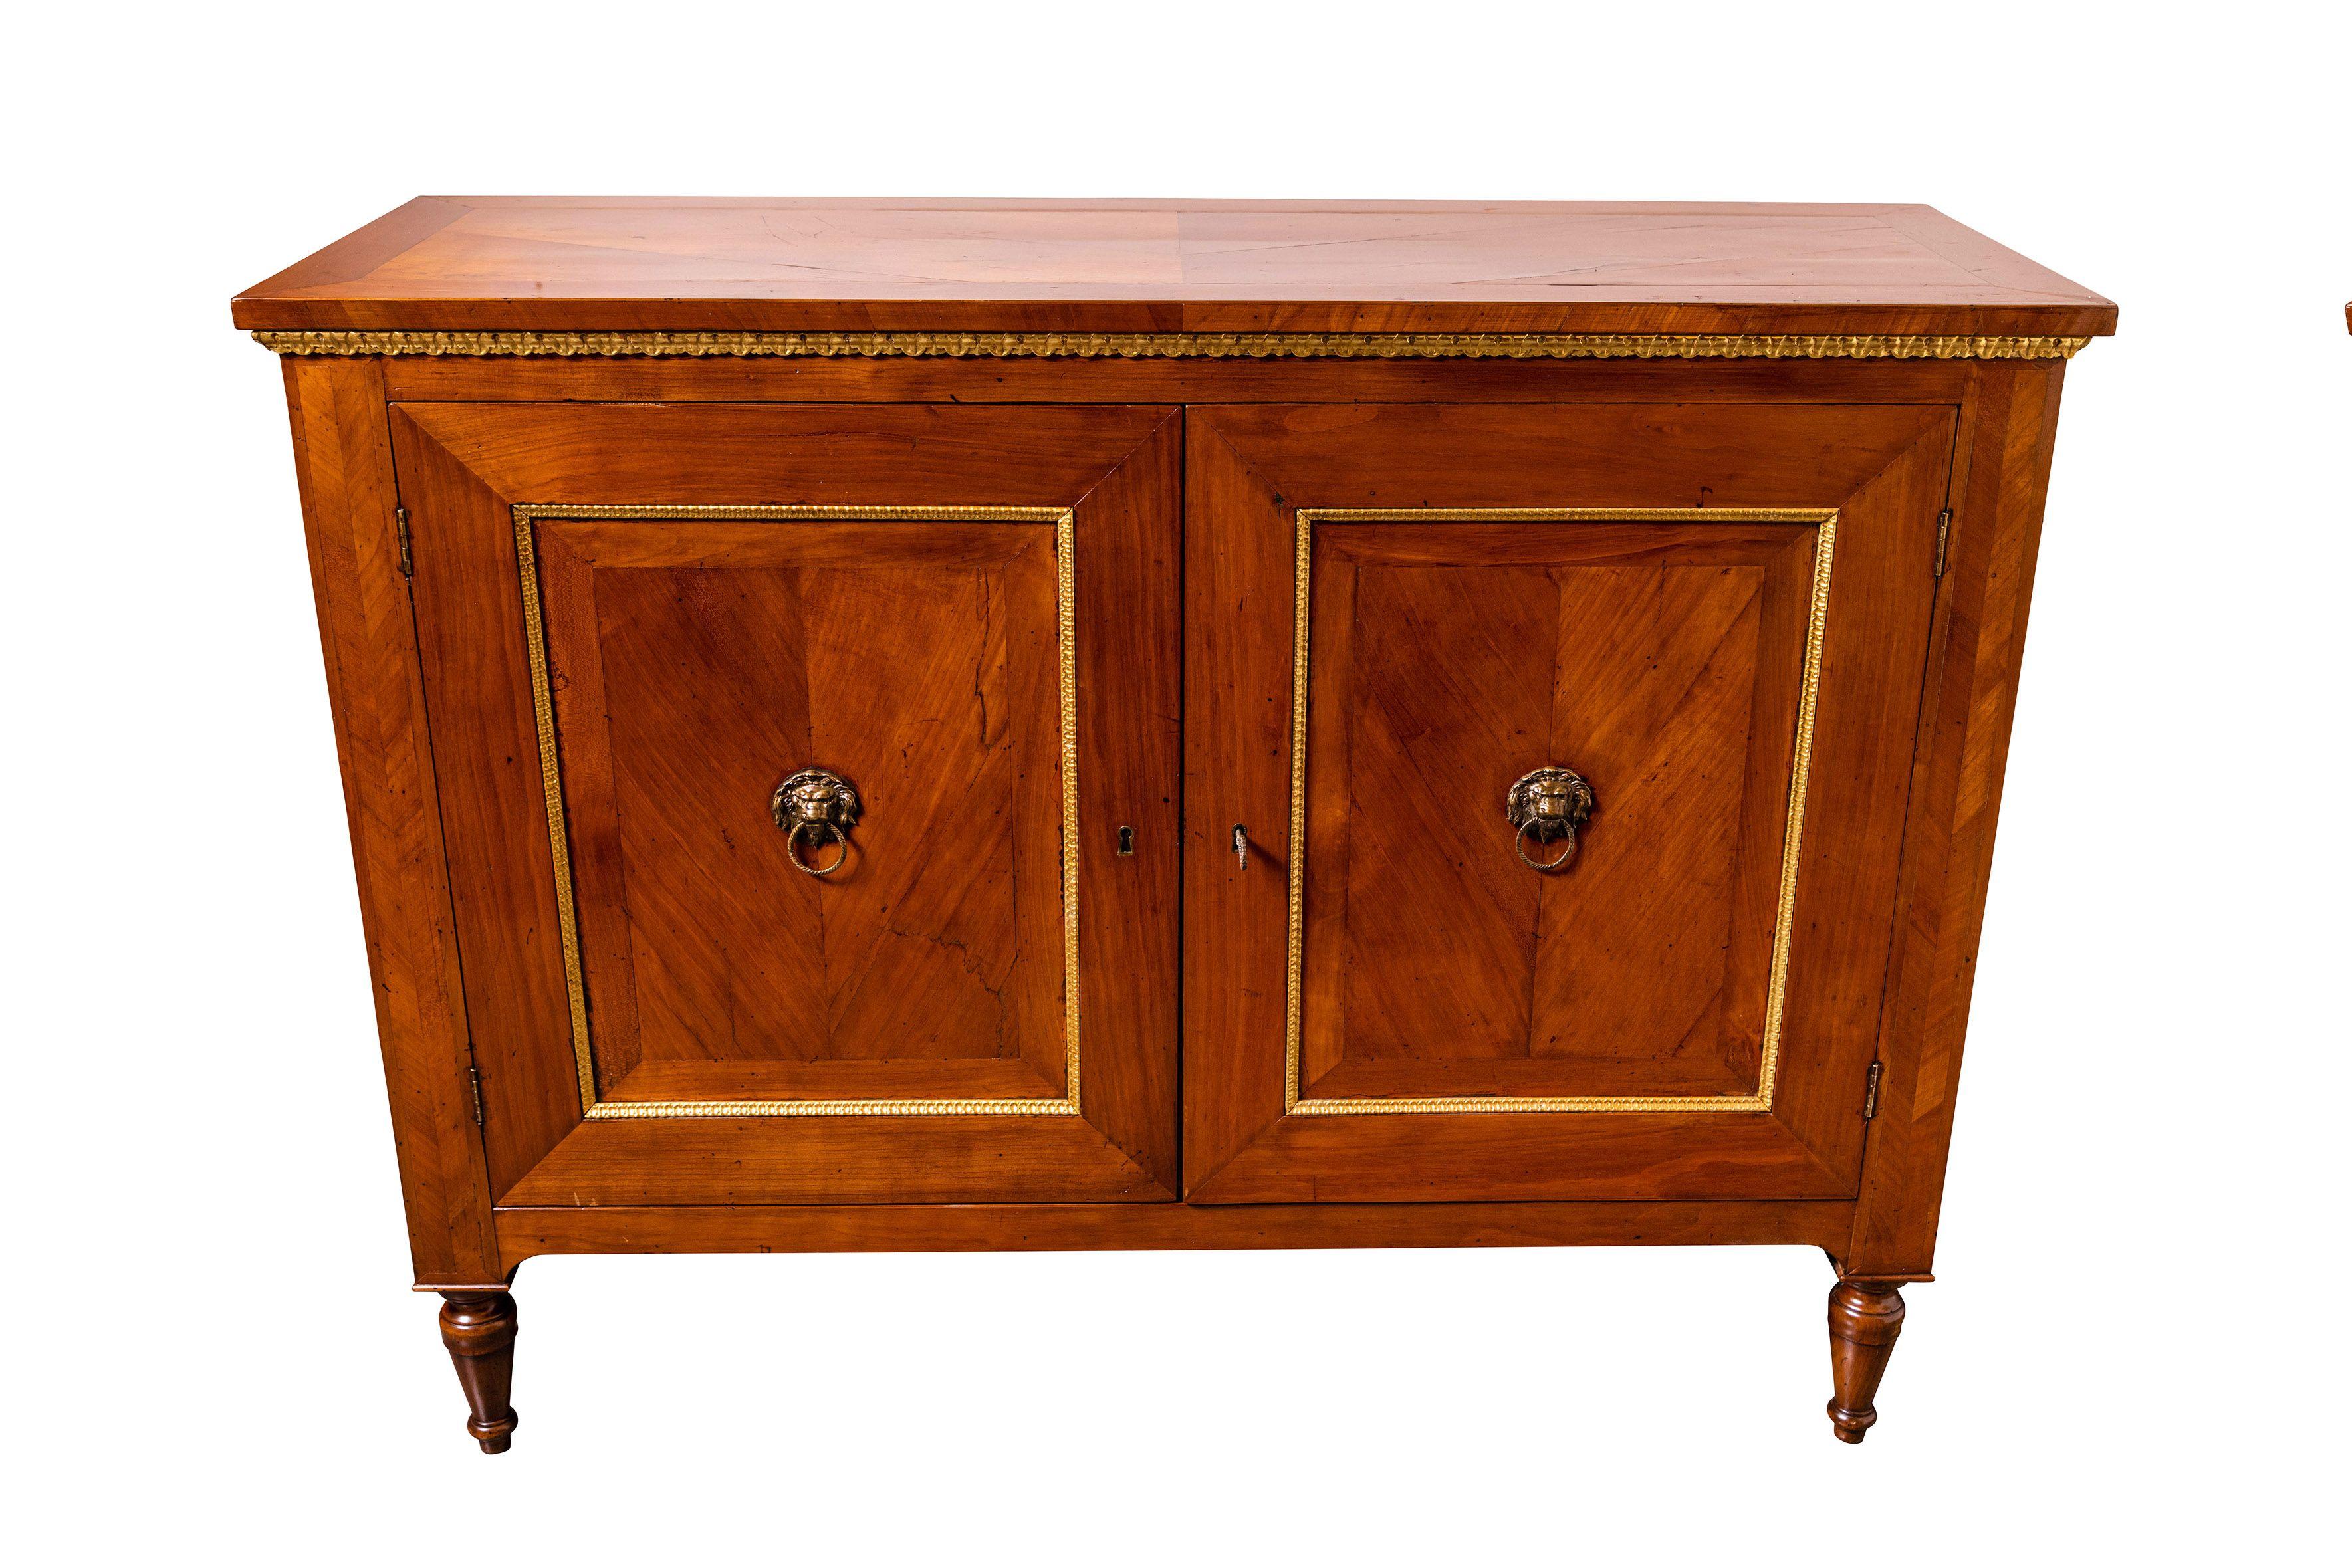 An impressive, sleek, mated pair of c. 1885, hand-carved, paneled, two door cabinets from the Emilia Romagna region of Northern Italy. Each veneered in book matched walnut. Both edged in gilded trim and finished with original, gilt bronze lion's